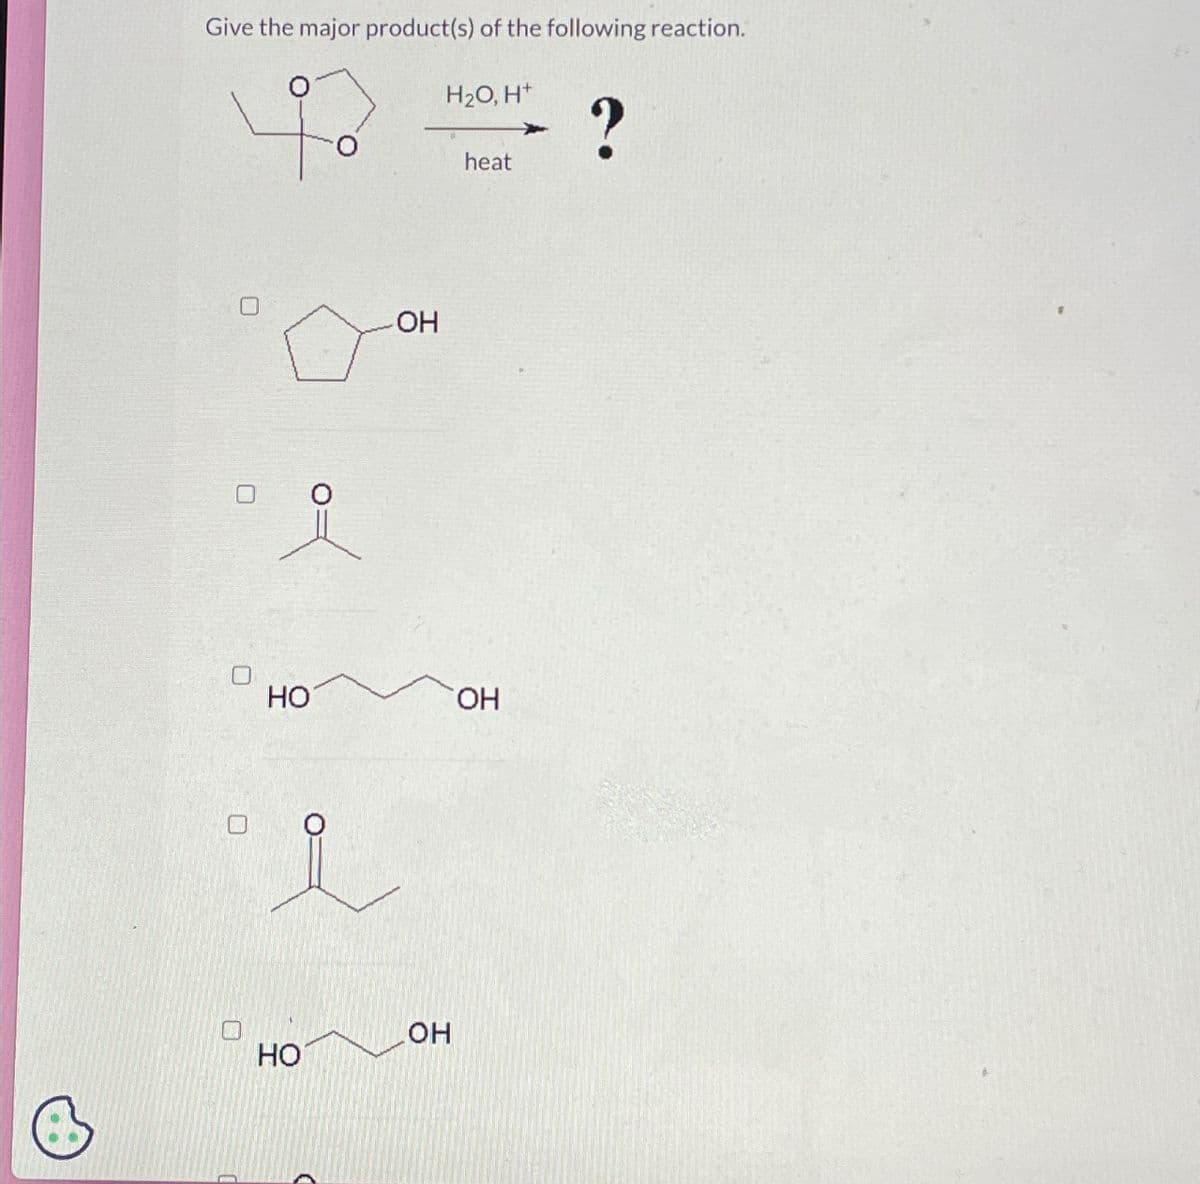 Give the major product(s) of the following reaction.
H2O, H+
что
НО
HO
OH
OH
heat
OH
?